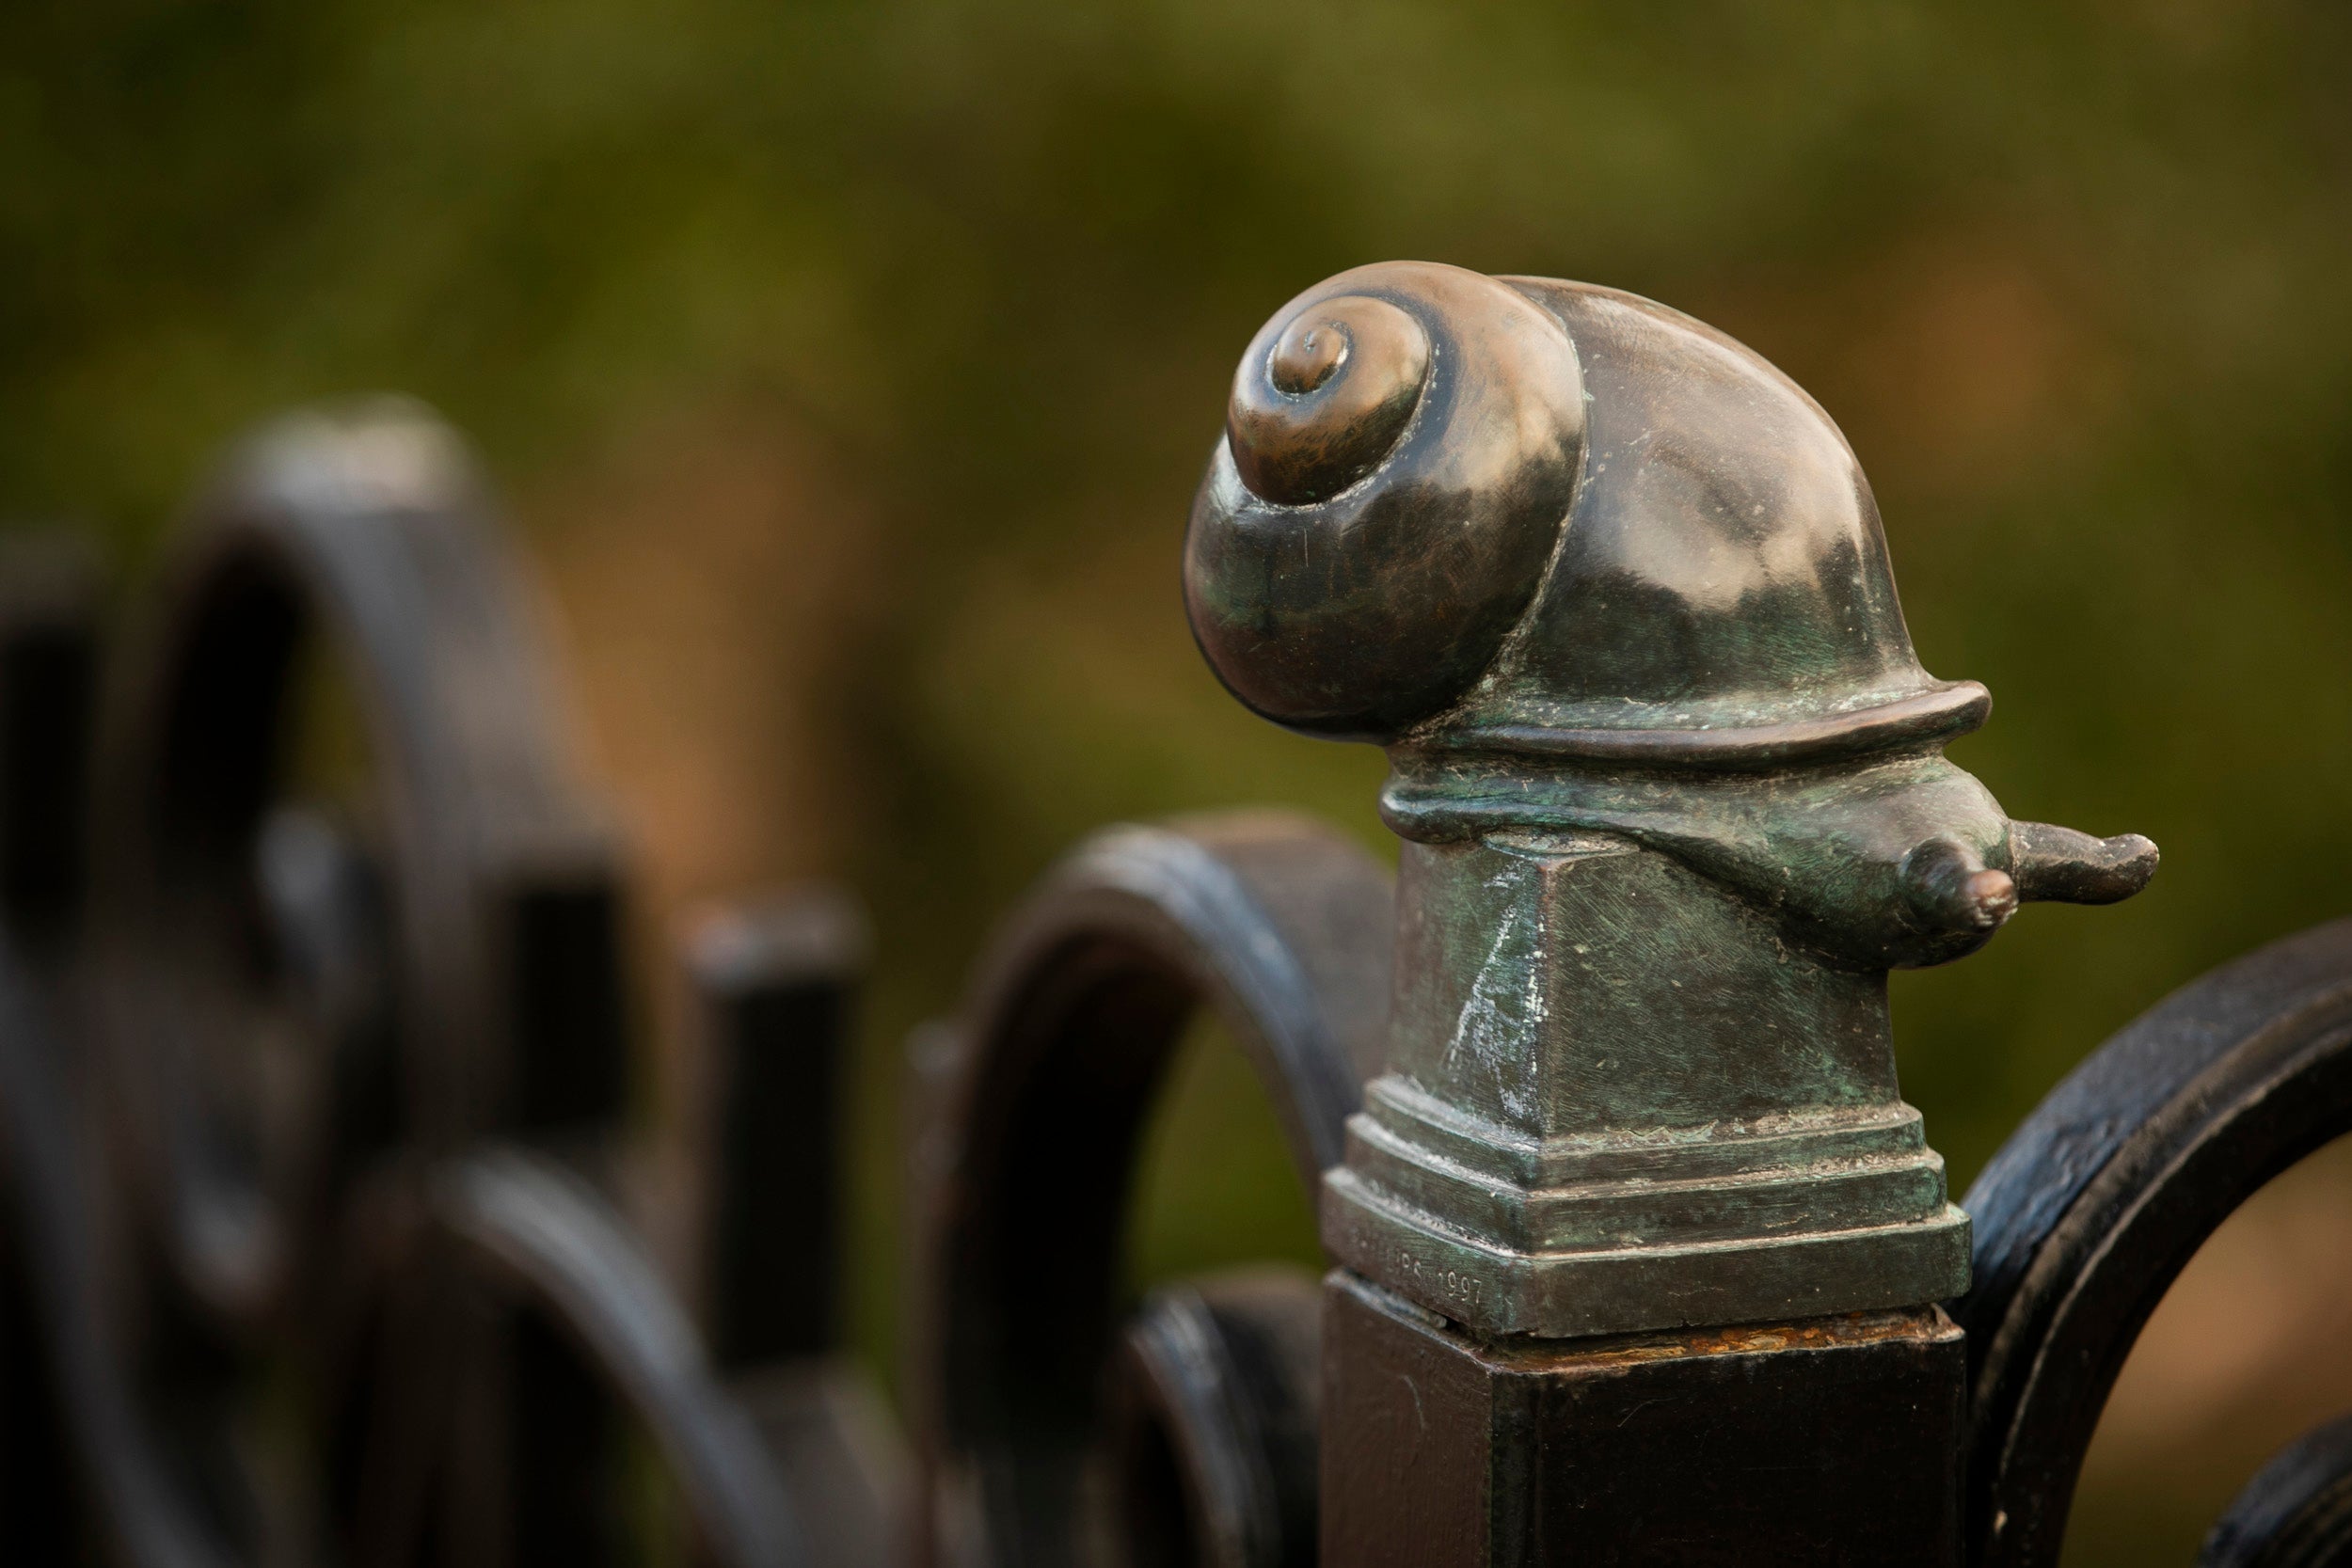 A snail decorates a fence in Quincy Square.